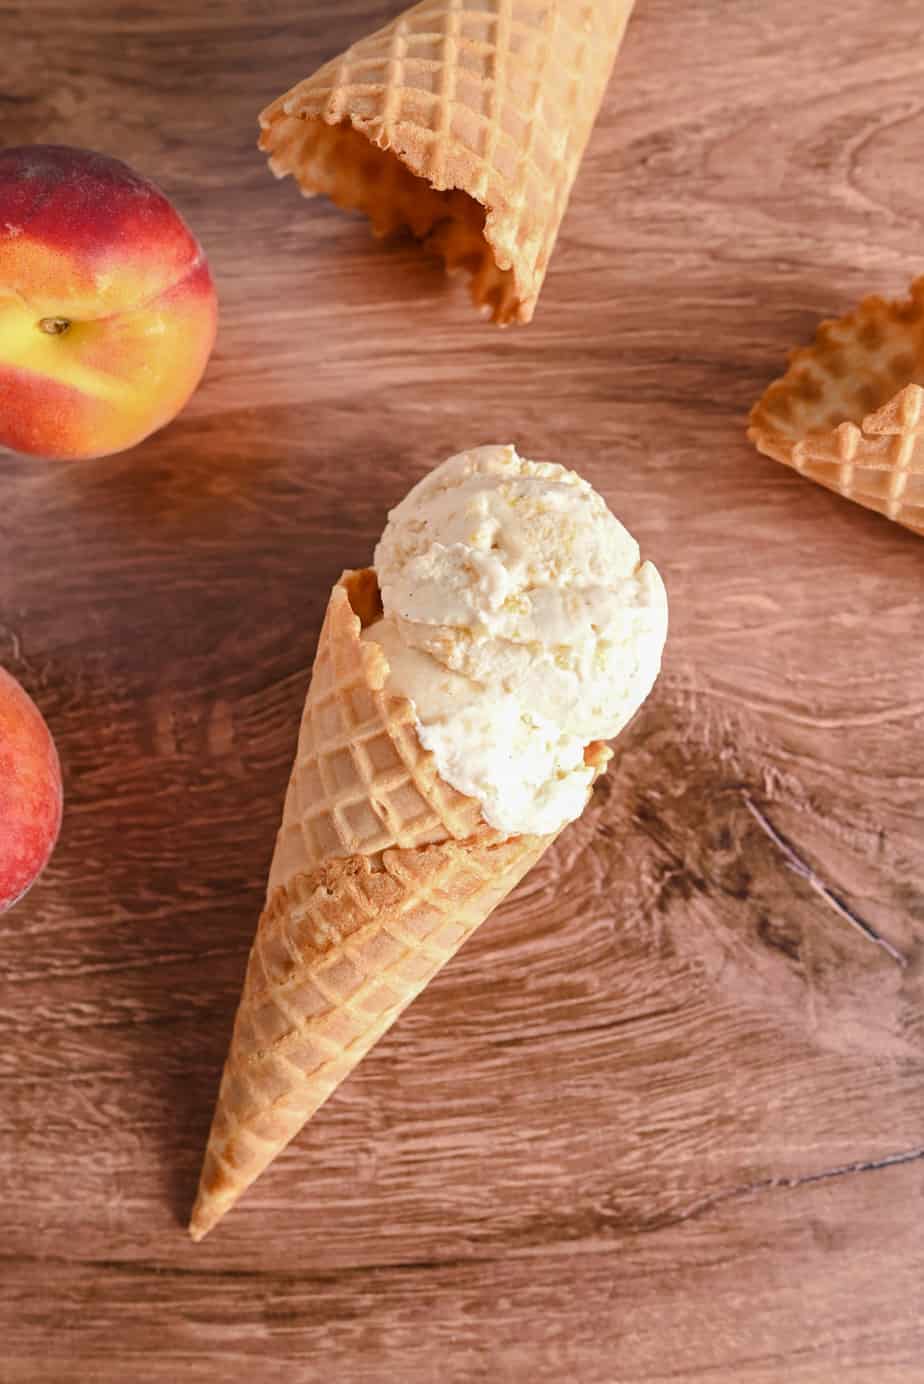 Peach ice cream in a waffle cone on a wooden countertop amongst empty waffle cones.